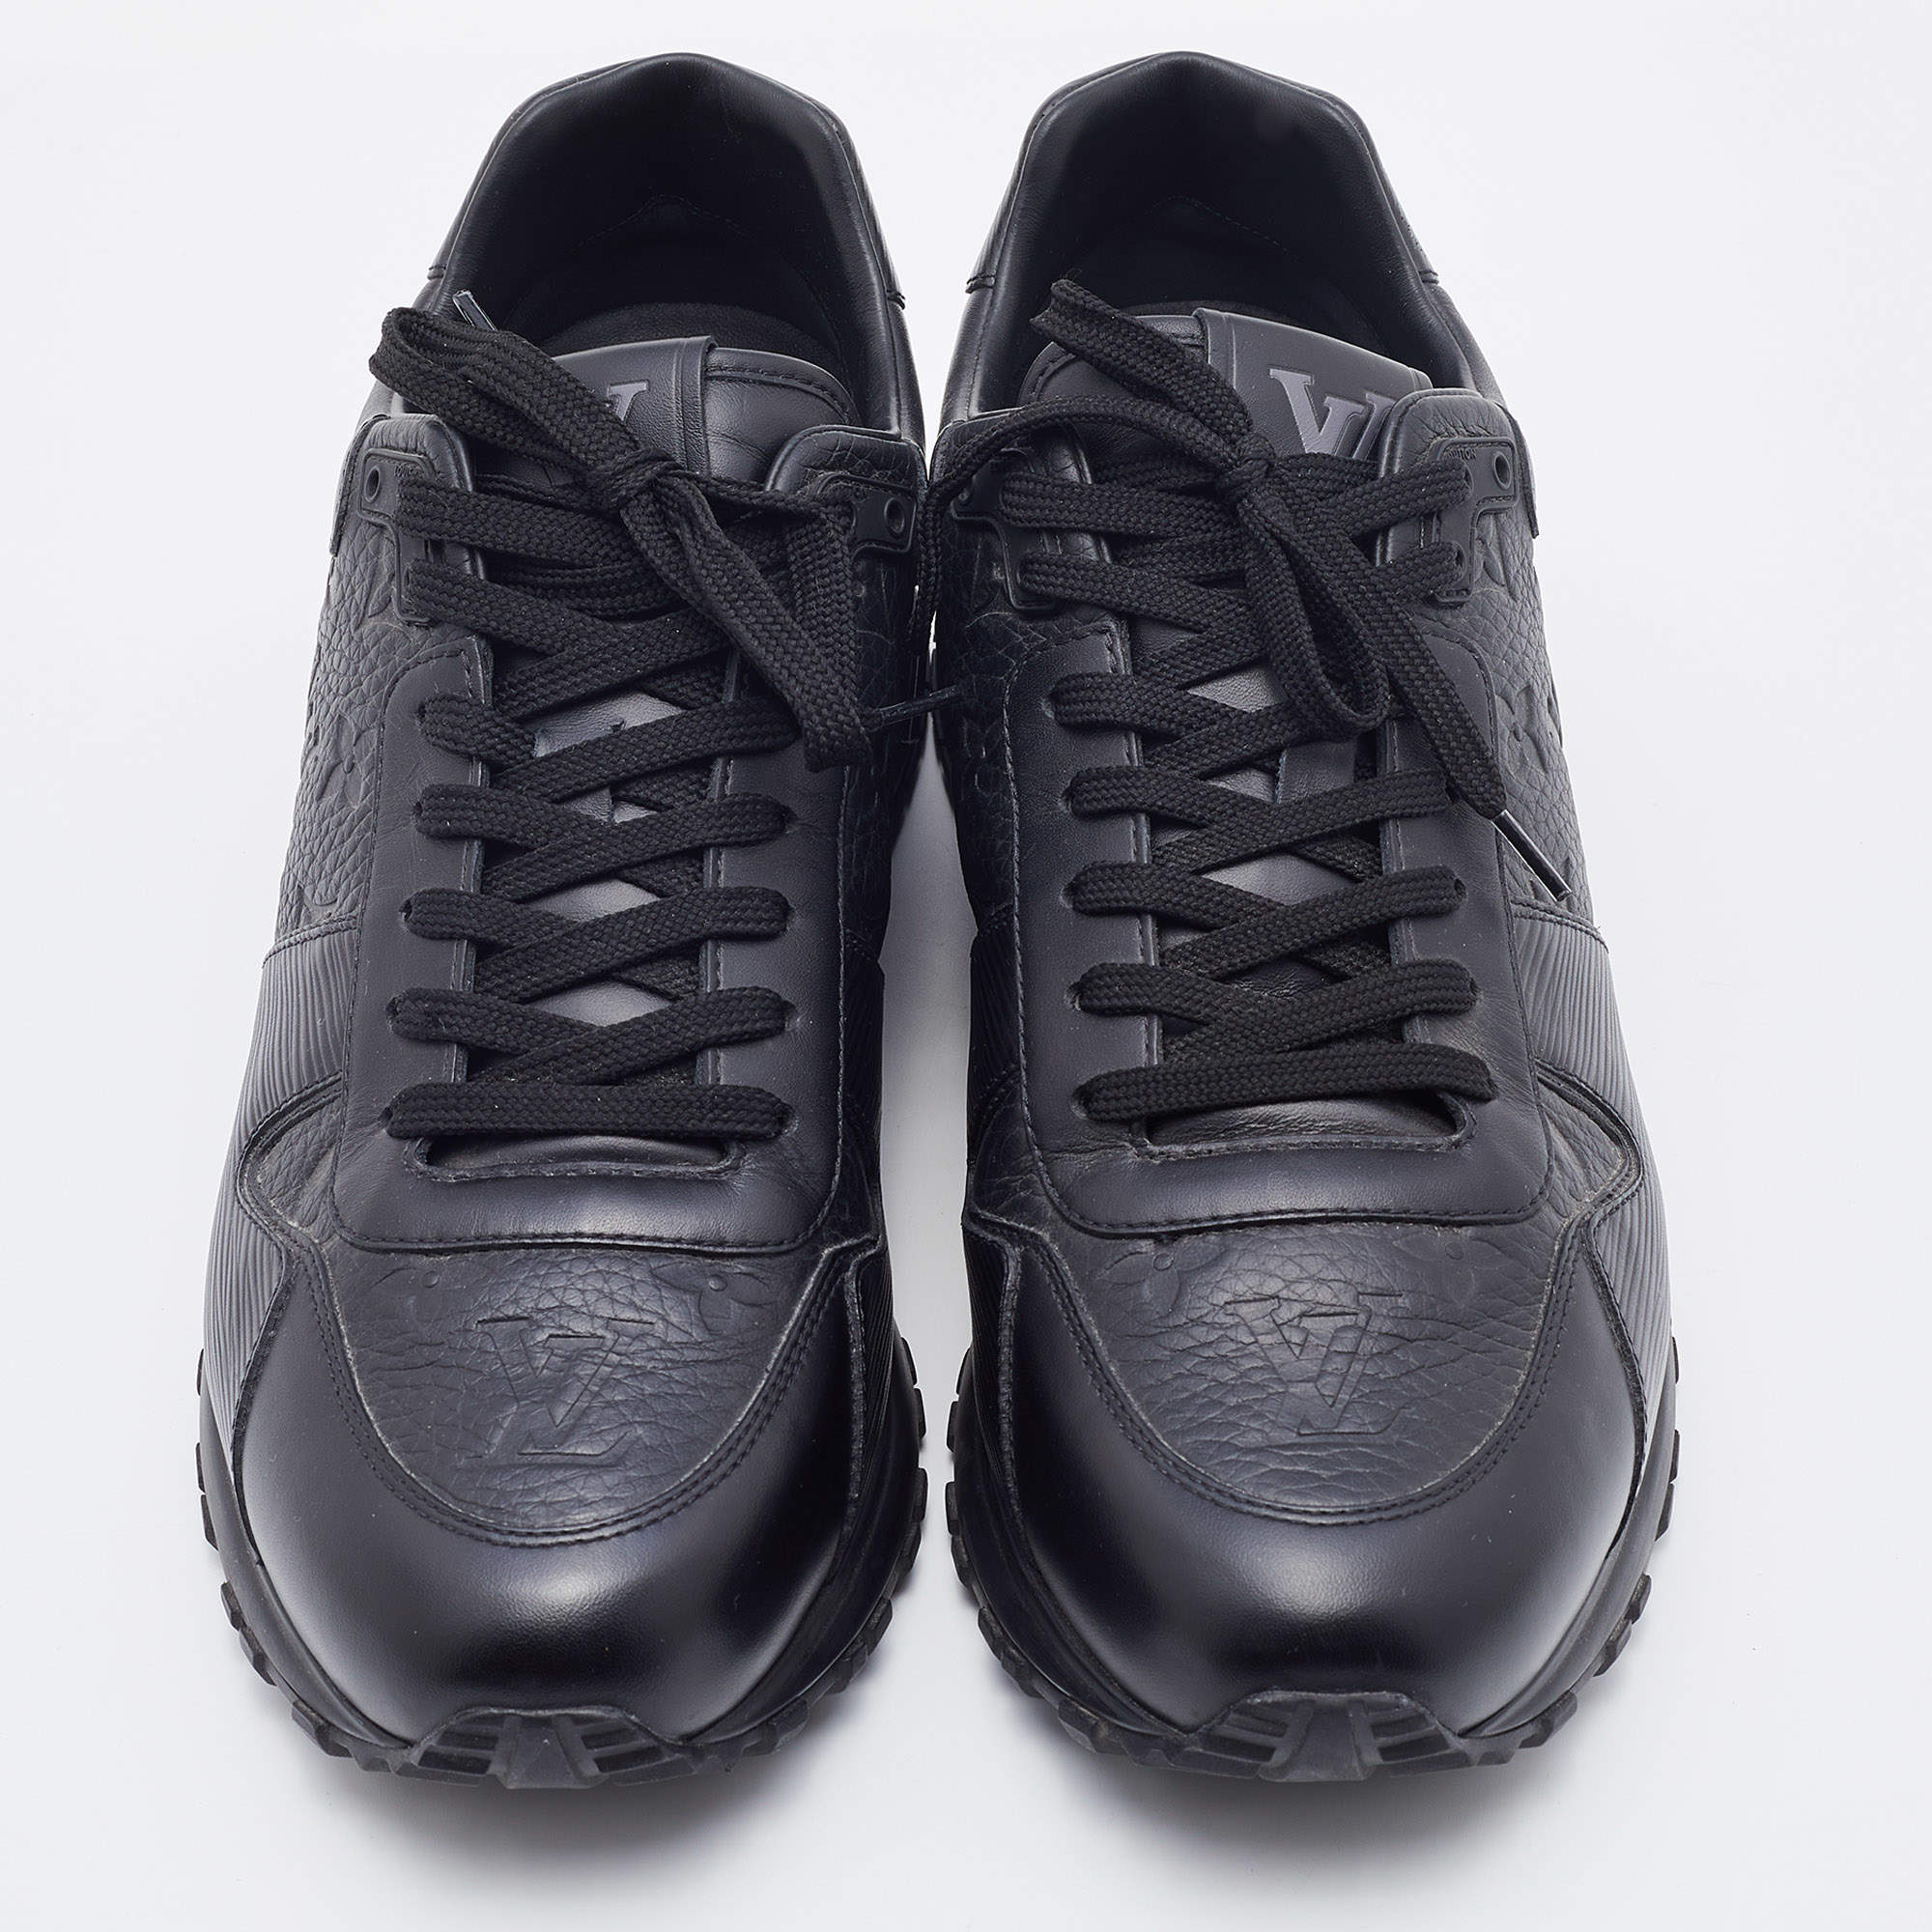 Run away leather low trainers Louis Vuitton Black size 48 EU in Leather -  28947102